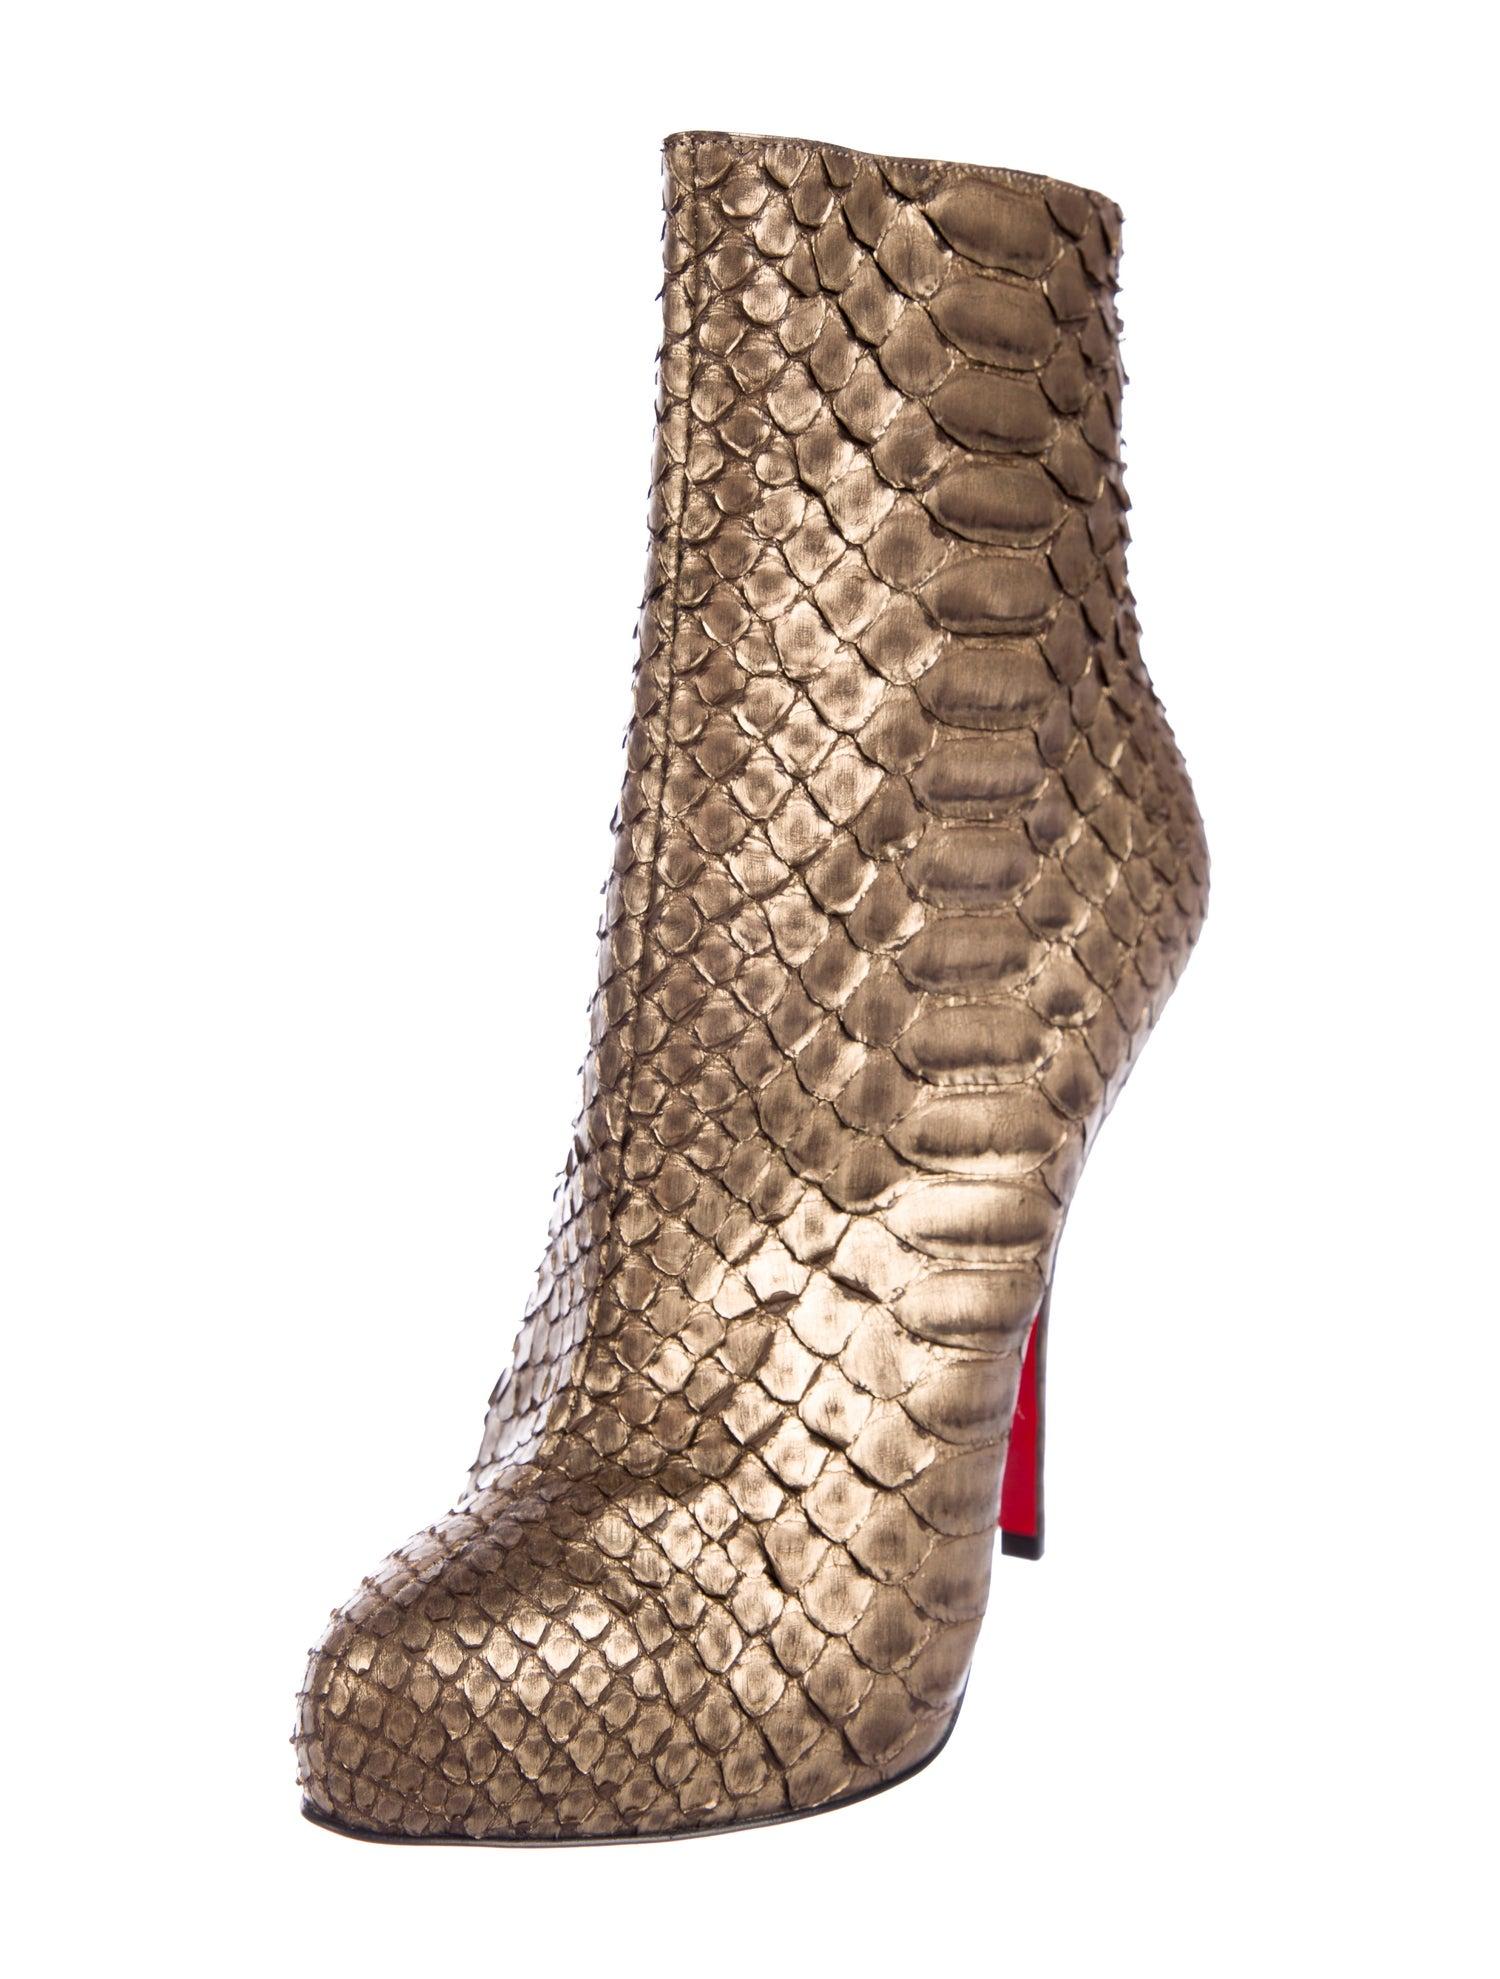 Christian Louboutin NEW Bronze Gold Snakeskin Ankle Booties Boots 

Size IT 38.5
Snakeskin
Zip closure 
Made in Italy
Heel height 5